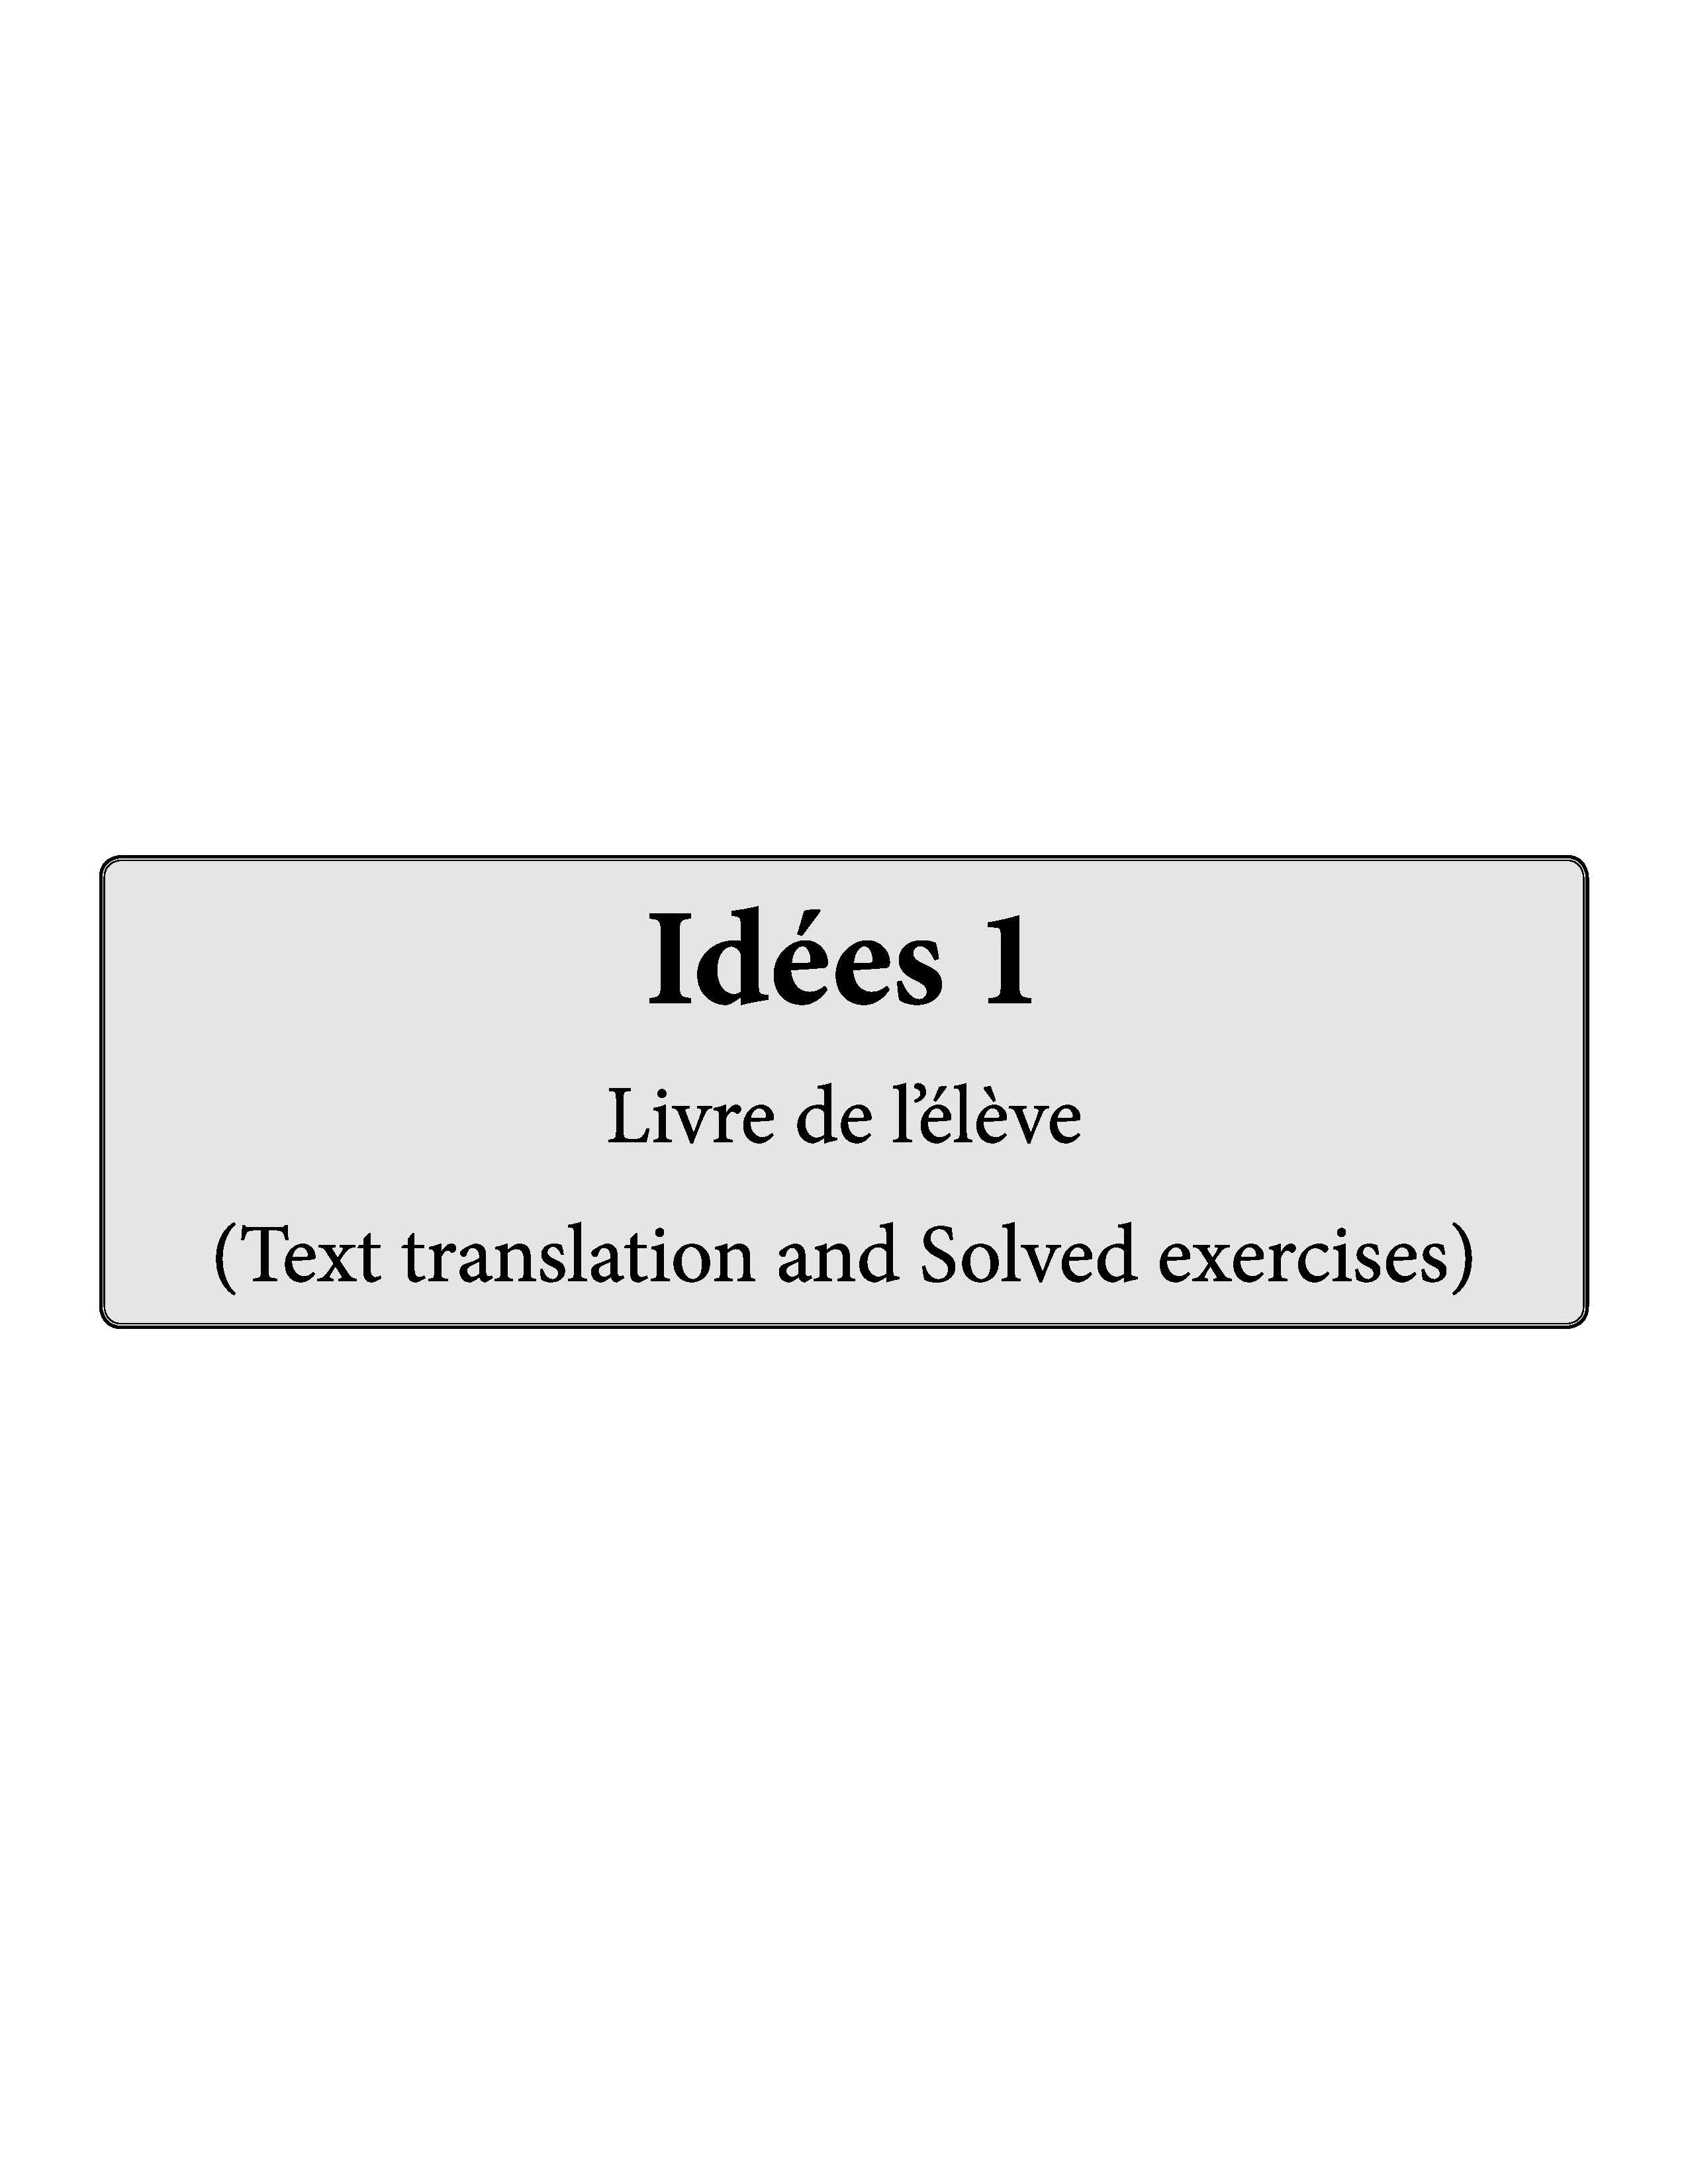 Idées Complete Study Material 1 (For Class 6) Text Translation